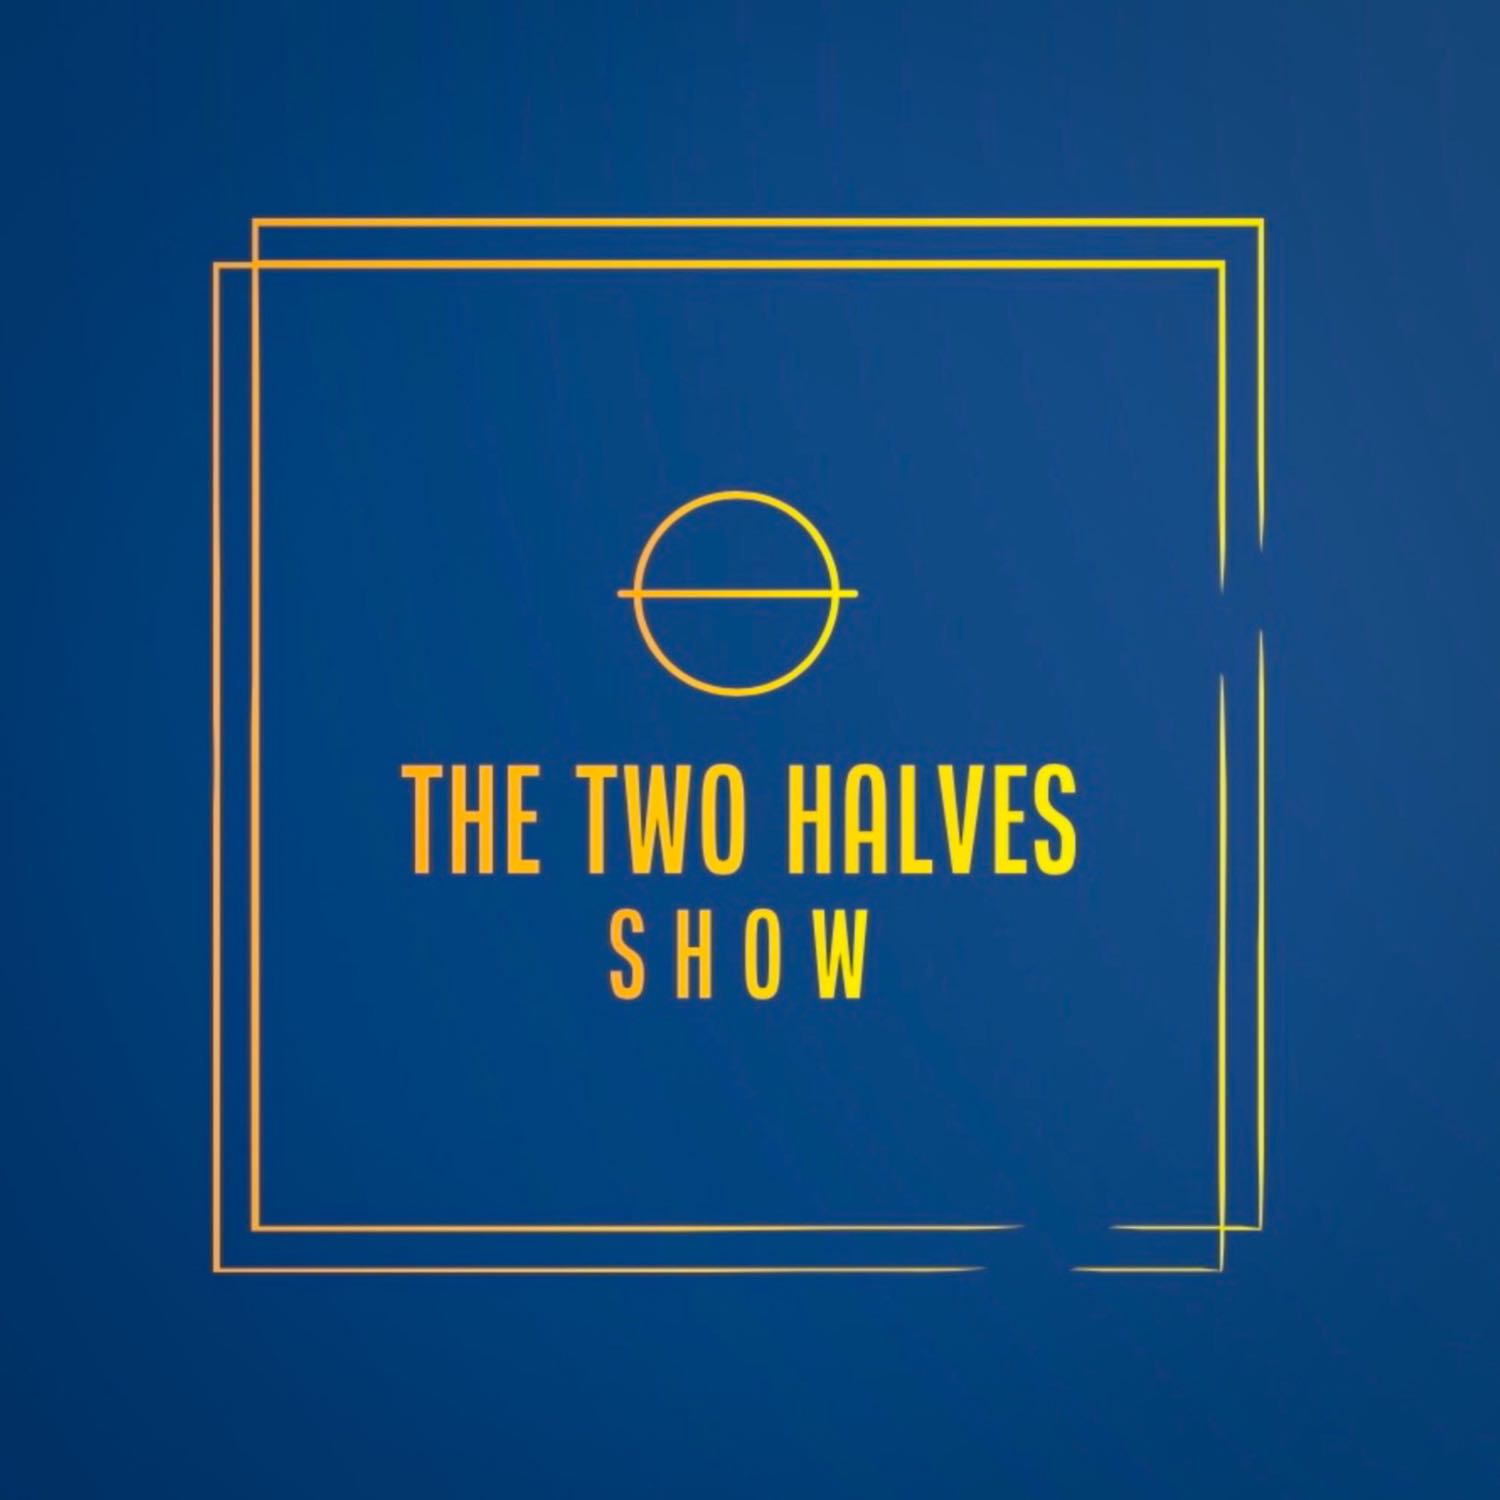 The Two Halves Show Ep. 8 - England all time XI Draft! | Roger Federer Retires | NFL week 3 round-up